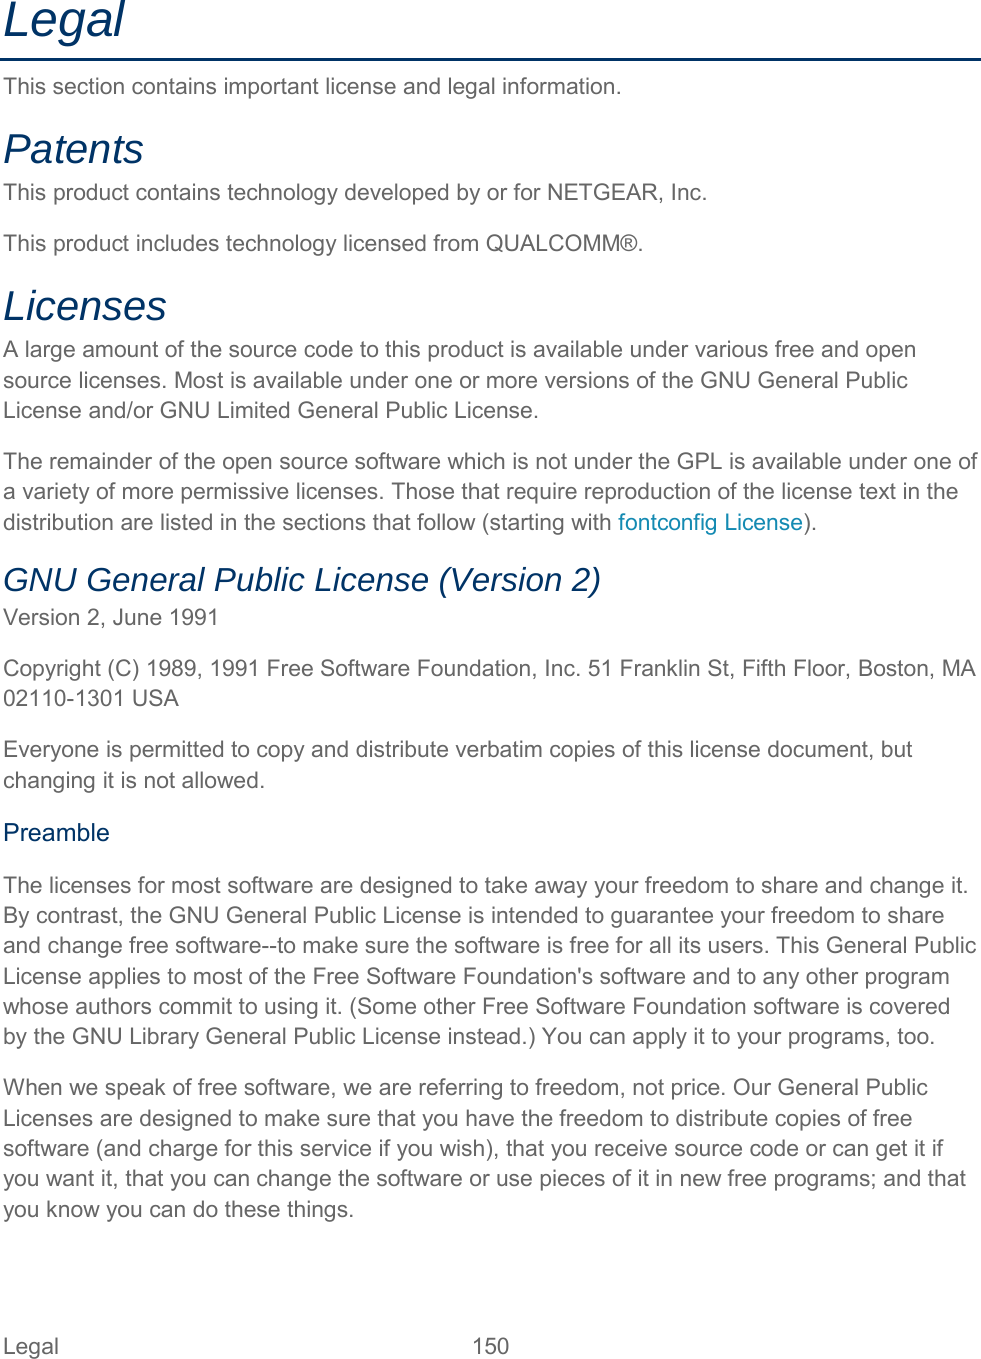 Legal This section contains important license and legal information. Patents  This product contains technology developed by or for NETGEAR, Inc. This product includes technology licensed from QUALCOMM®. Licenses  A large amount of the source code to this product is available under various free and open source licenses. Most is available under one or more versions of the GNU General Public License and/or GNU Limited General Public License. The remainder of the open source software which is not under the GPL is available under one of a variety of more permissive licenses. Those that require reproduction of the license text in the distribution are listed in the sections that follow (starting with fontconfig License). GNU General Public License (Version 2)  Version 2, June 1991 Copyright (C) 1989, 1991 Free Software Foundation, Inc. 51 Franklin St, Fifth Floor, Boston, MA 02110-1301 USA Everyone is permitted to copy and distribute verbatim copies of this license document, but changing it is not allowed.  Preamble The licenses for most software are designed to take away your freedom to share and change it. By contrast, the GNU General Public License is intended to guarantee your freedom to share and change free software--to make sure the software is free for all its users. This General Public License applies to most of the Free Software Foundation&apos;s software and to any other program whose authors commit to using it. (Some other Free Software Foundation software is covered by the GNU Library General Public License instead.) You can apply it to your programs, too.  When we speak of free software, we are referring to freedom, not price. Our General Public Licenses are designed to make sure that you have the freedom to distribute copies of free software (and charge for this service if you wish), that you receive source code or can get it if you want it, that you can change the software or use pieces of it in new free programs; and that you know you can do these things. Legal 150   